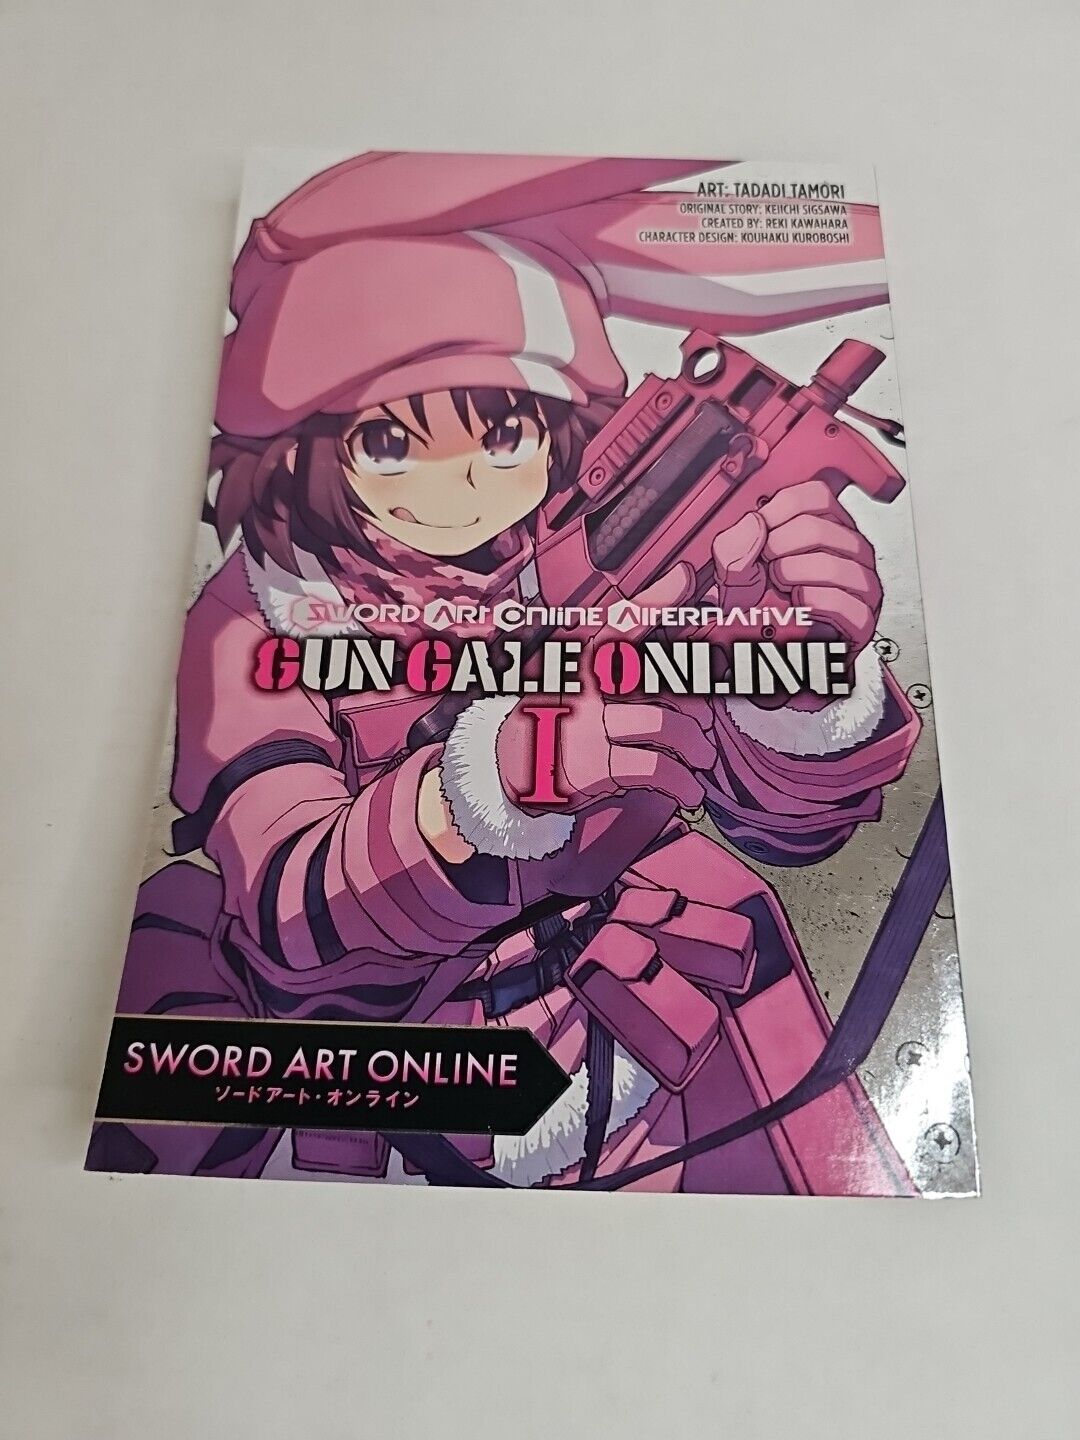 Gun Gale Online Vol.1 Manga Loot Crate Limited Edition 